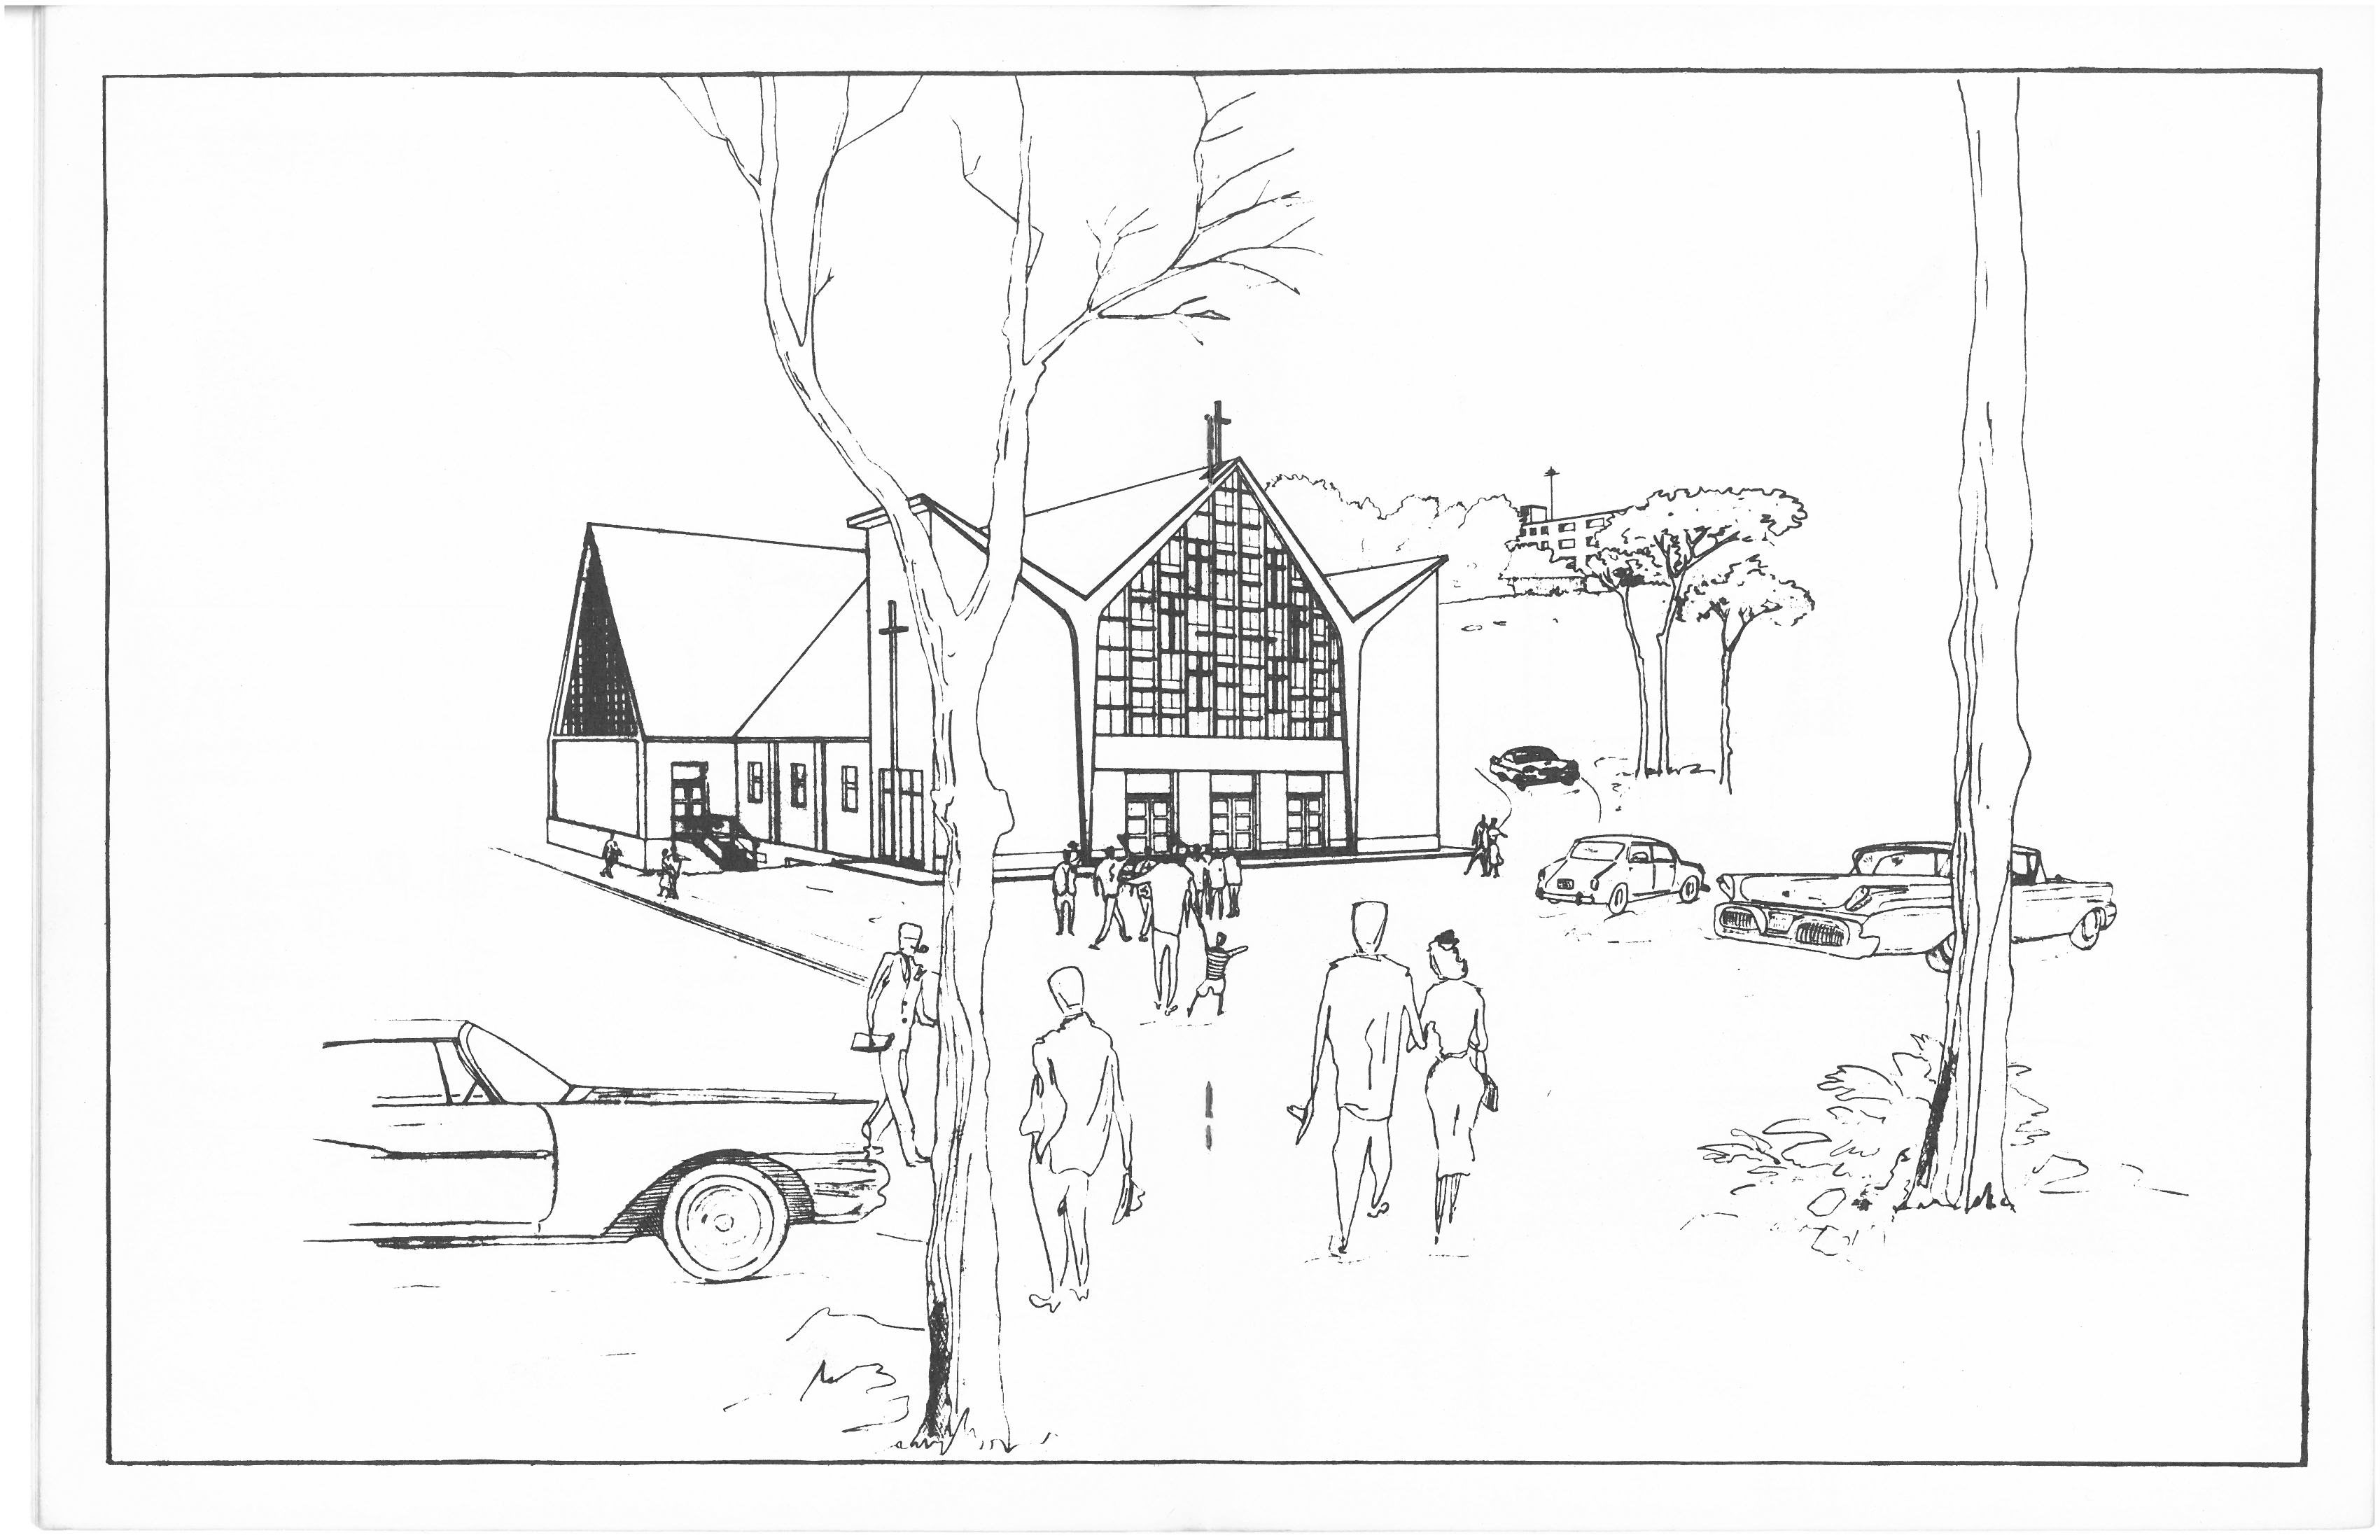 Drawing of the 1959 proposed church building